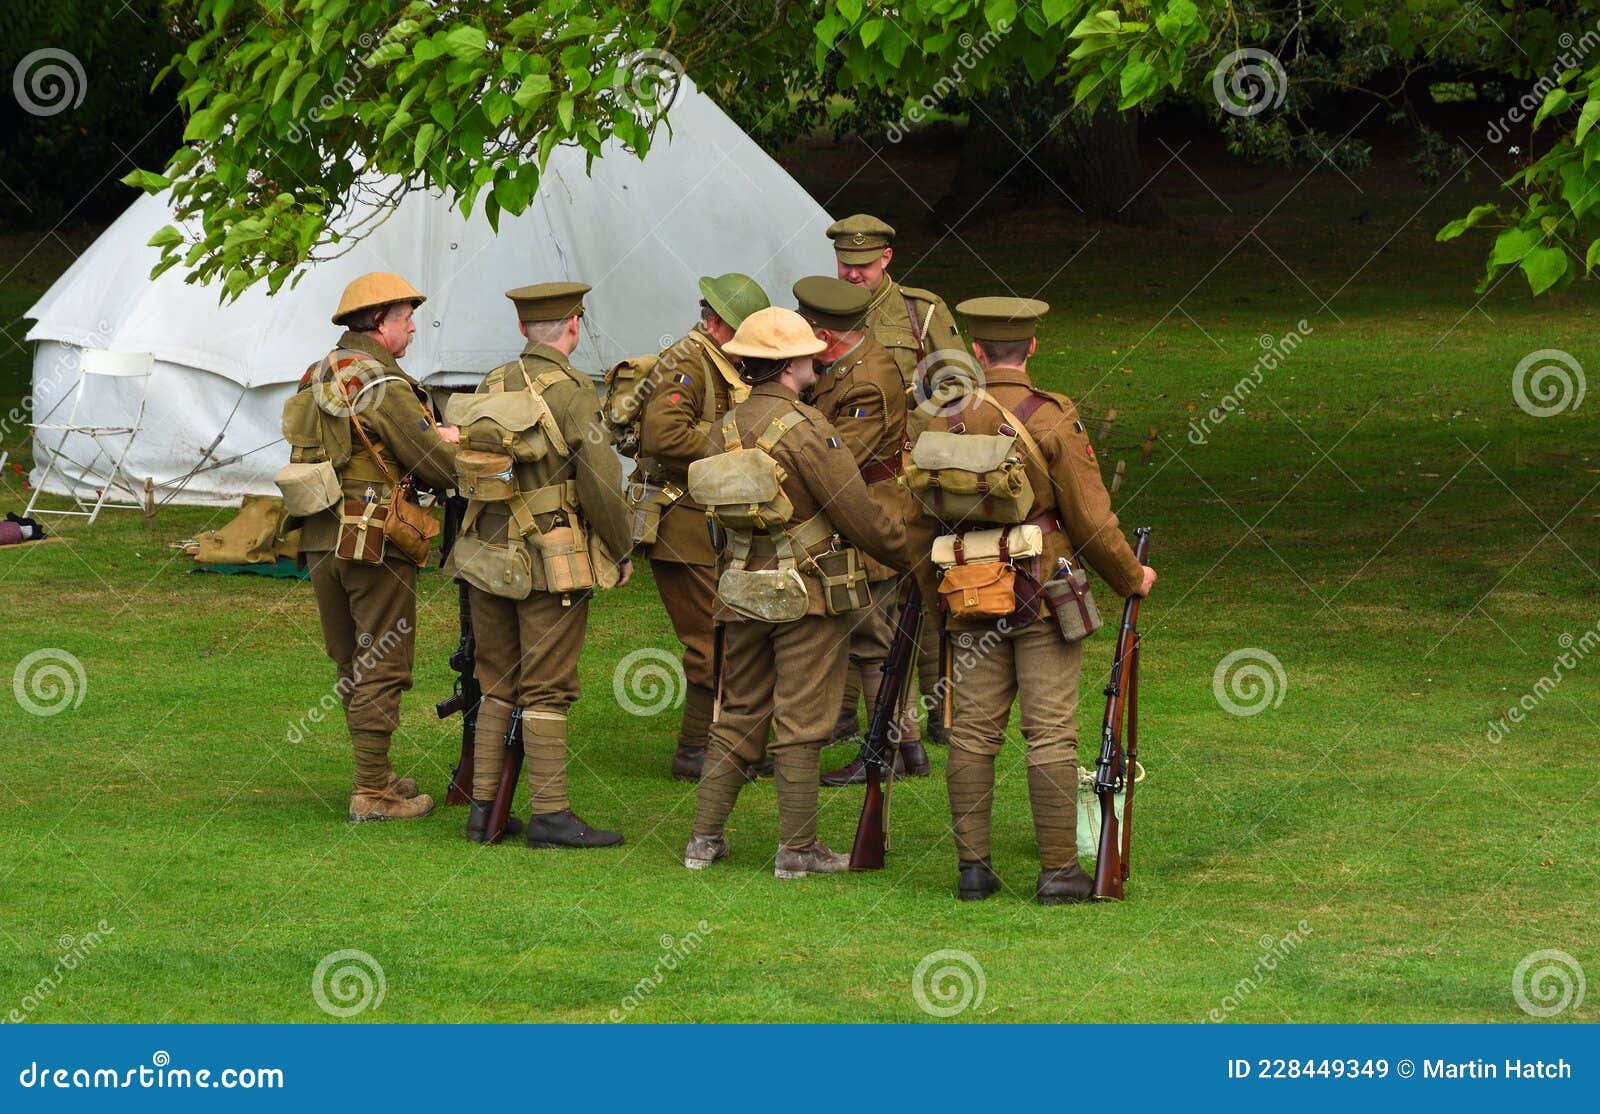 Men in World War One Uniforms with Rifles in Camp. Editorial Stock ...